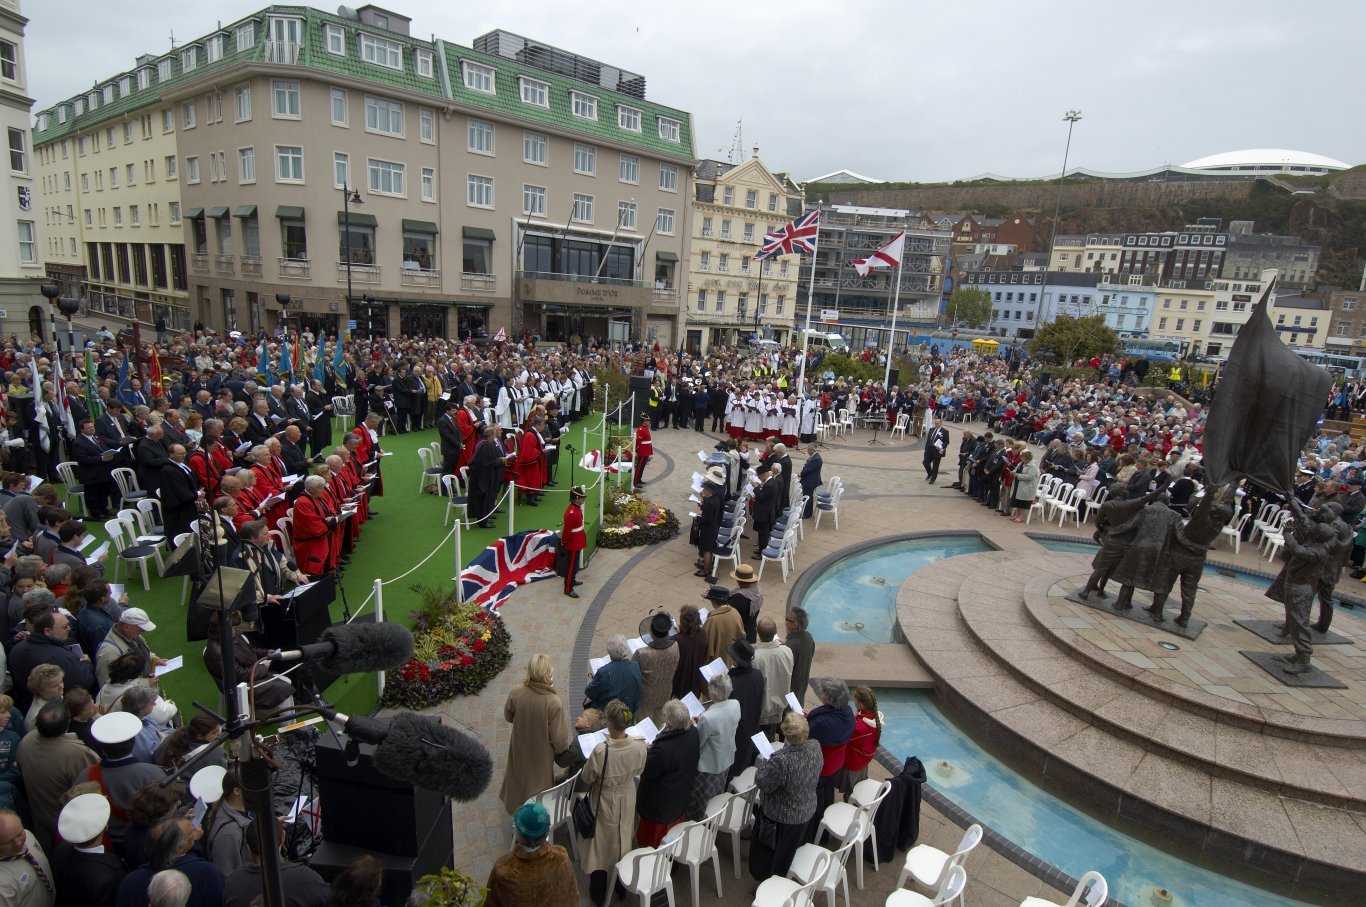 Liberation Day in Jersey